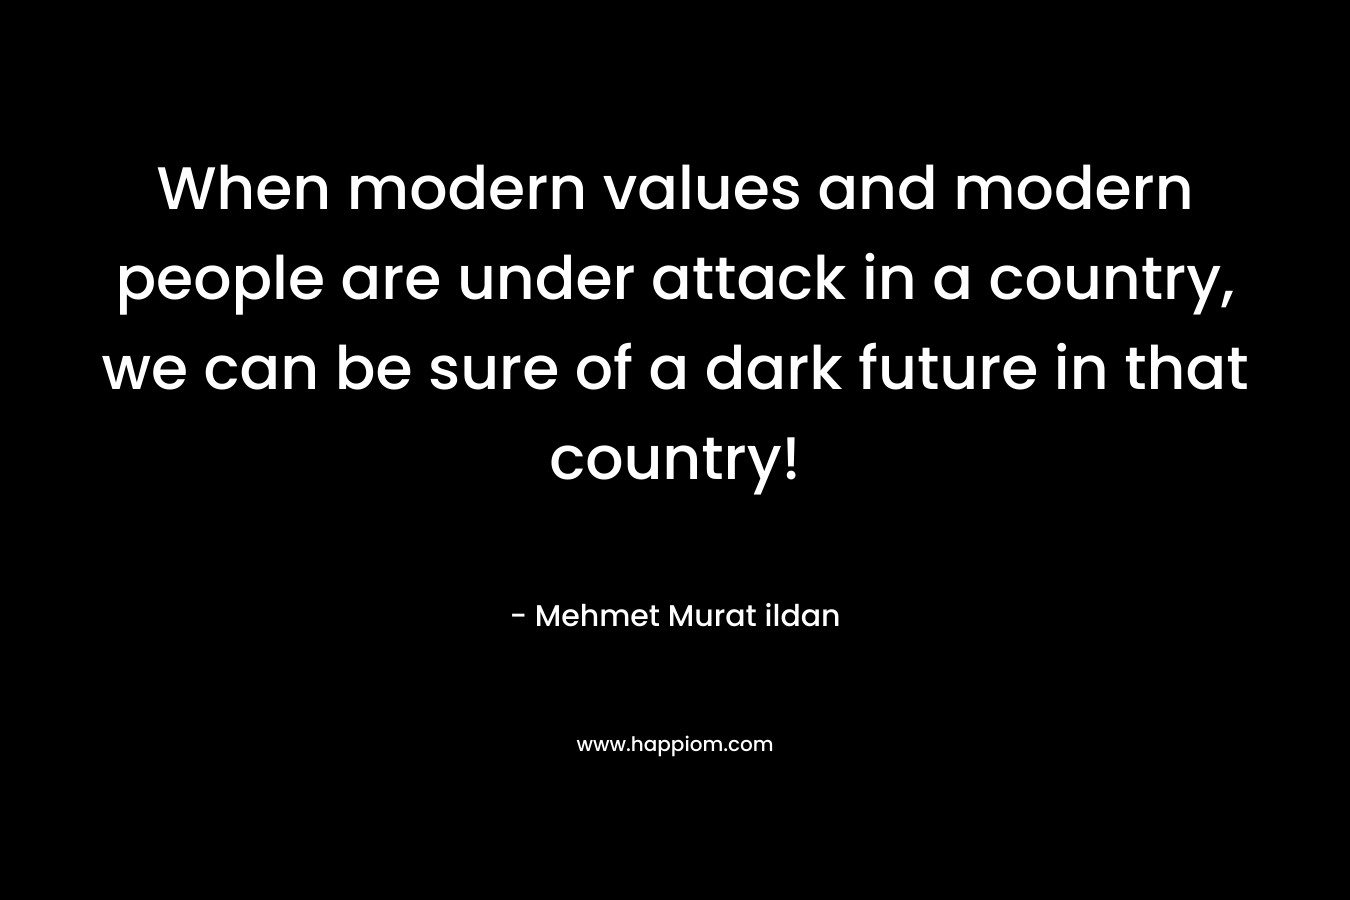 When modern values and modern people are under attack in a country, we can be sure of a dark future in that country!